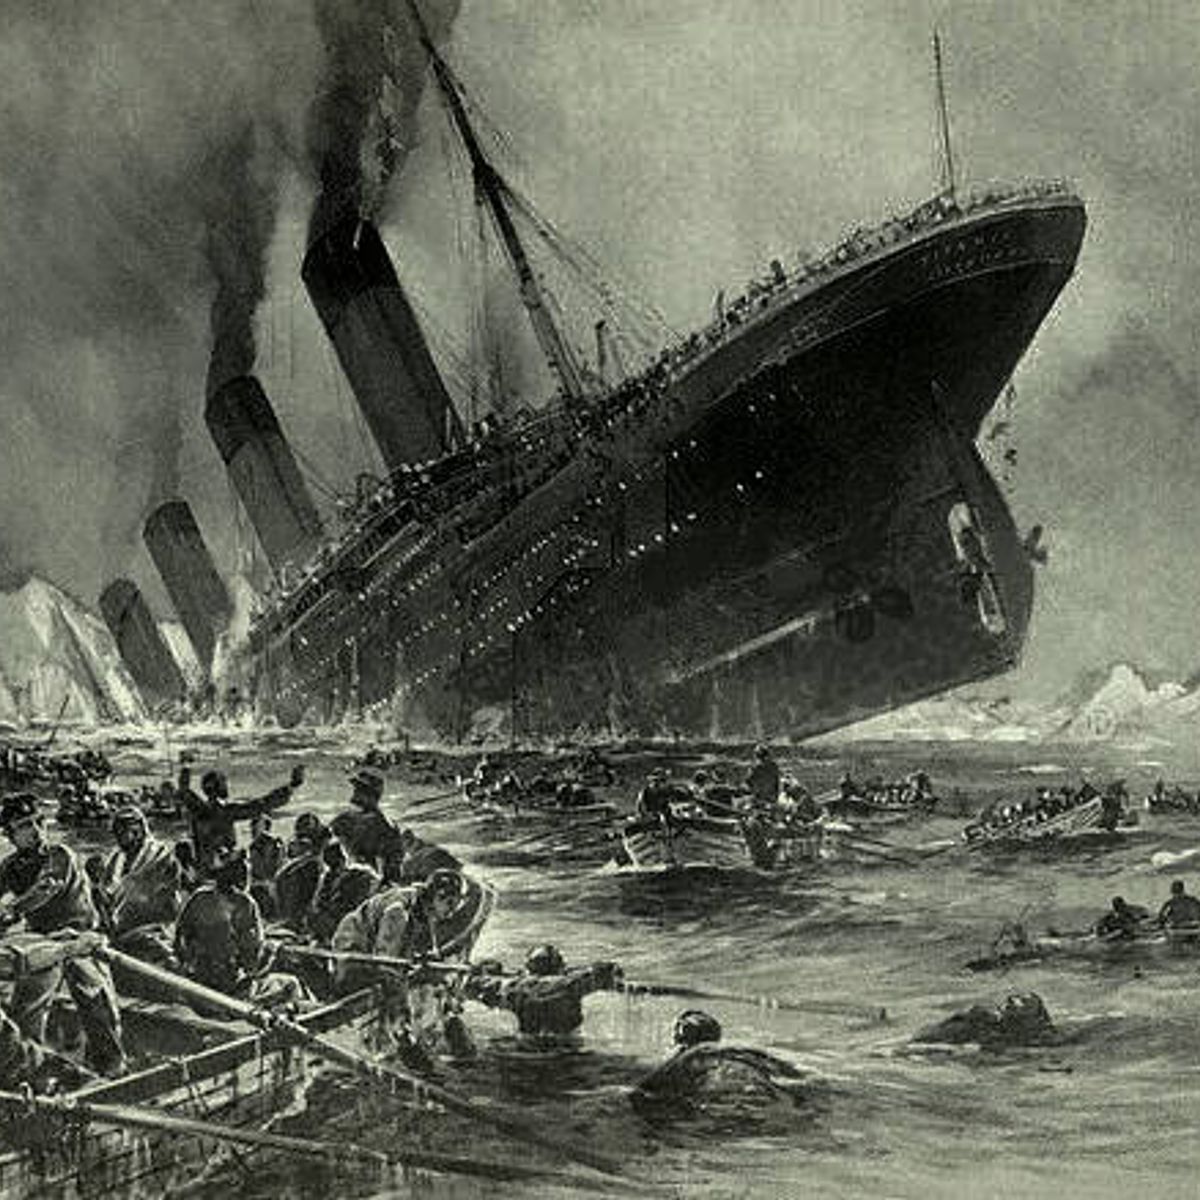 Does Video Offer Real Footage of the Titanic Sinking? 